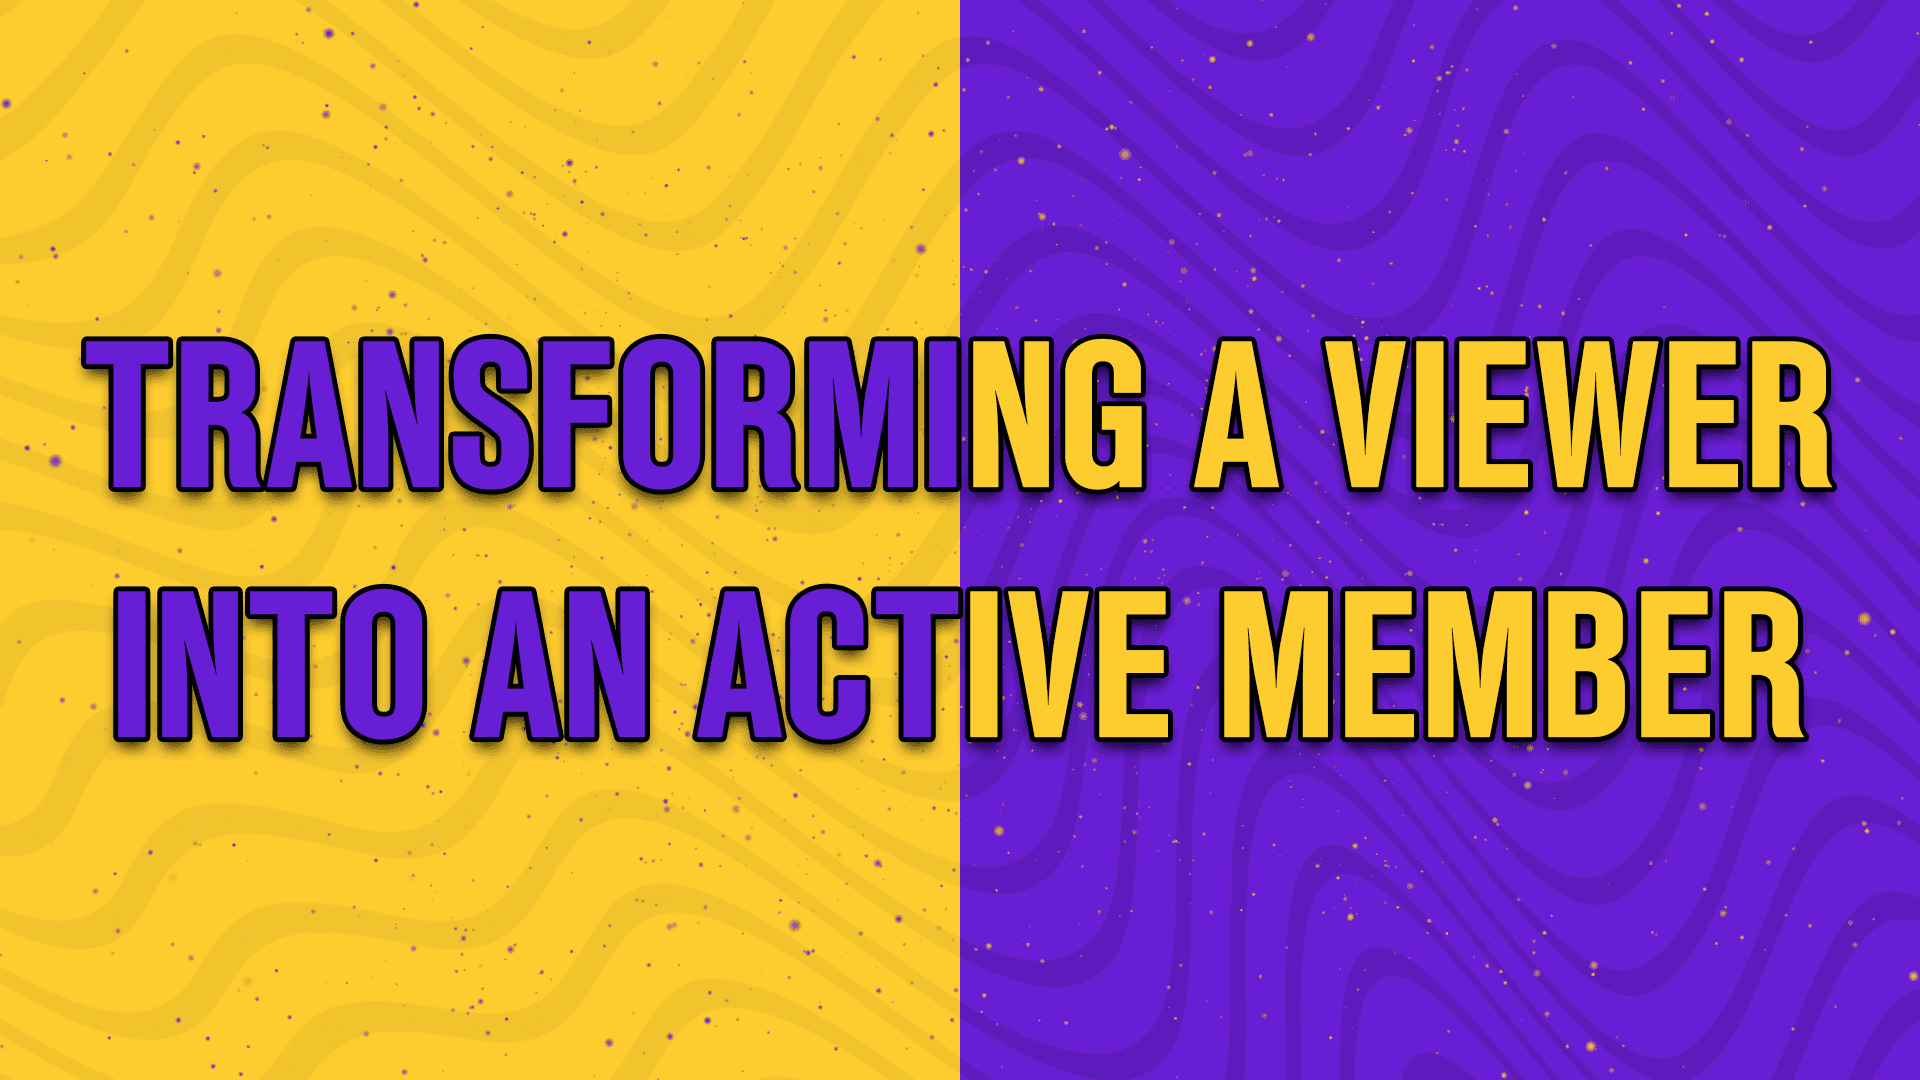 Transforming a viewer into an active member - StreamBee